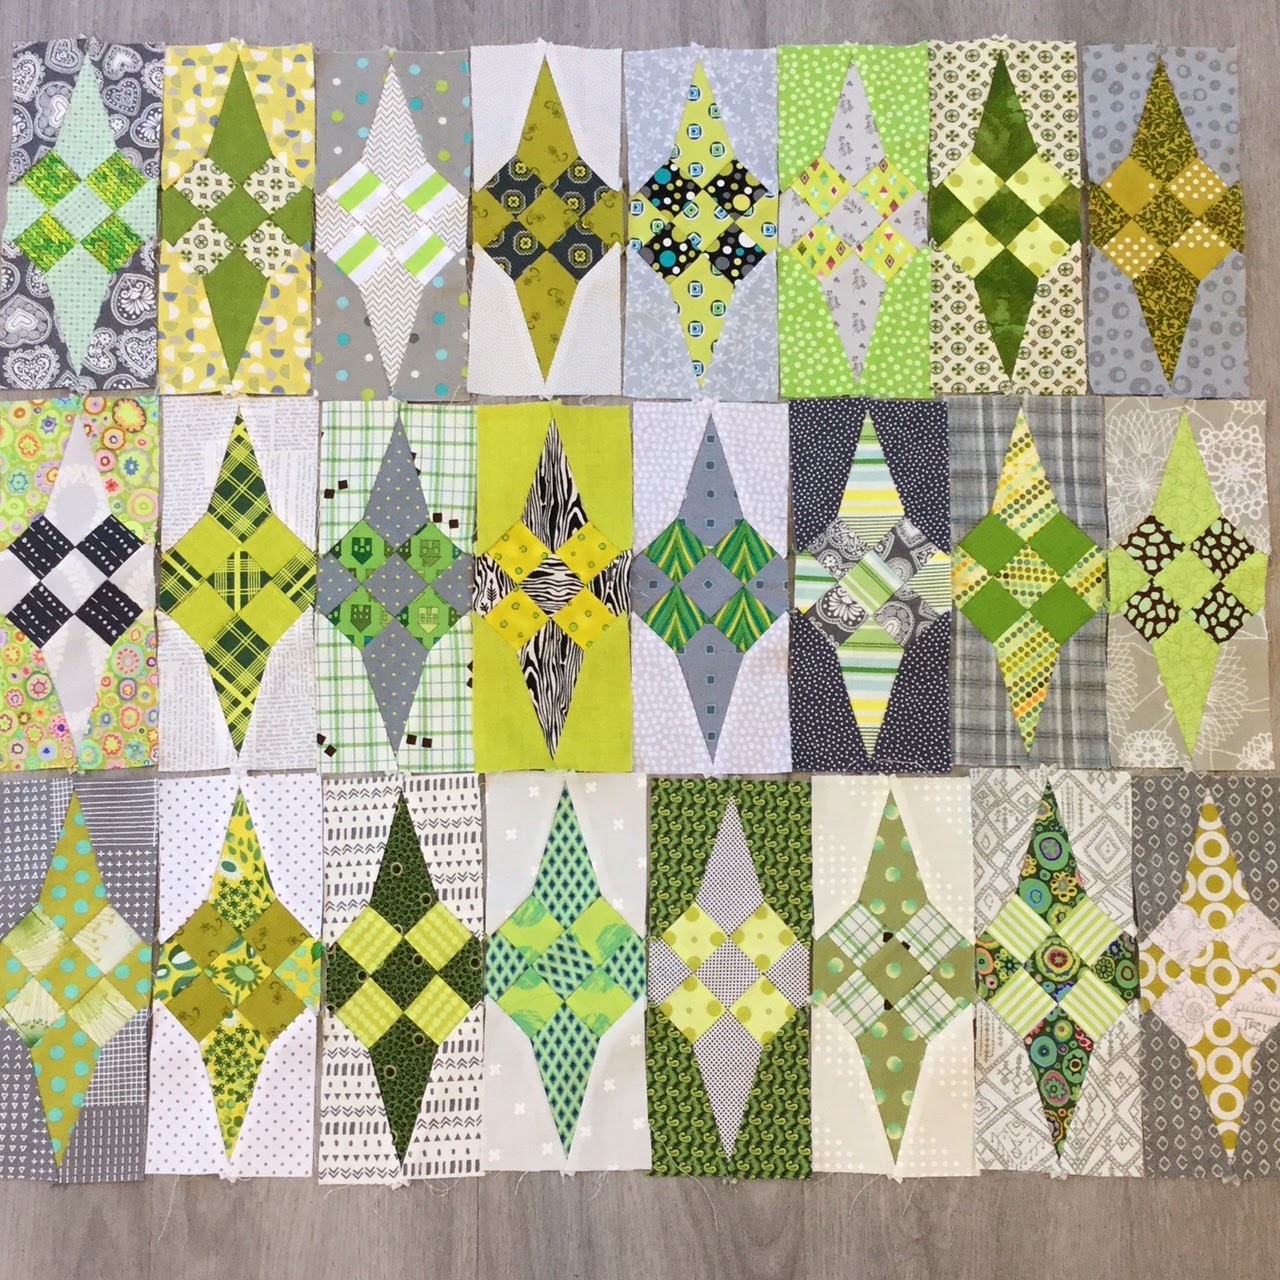 Wendy's Quilts and More: Glitter class with Jen Kingwell at Symposium